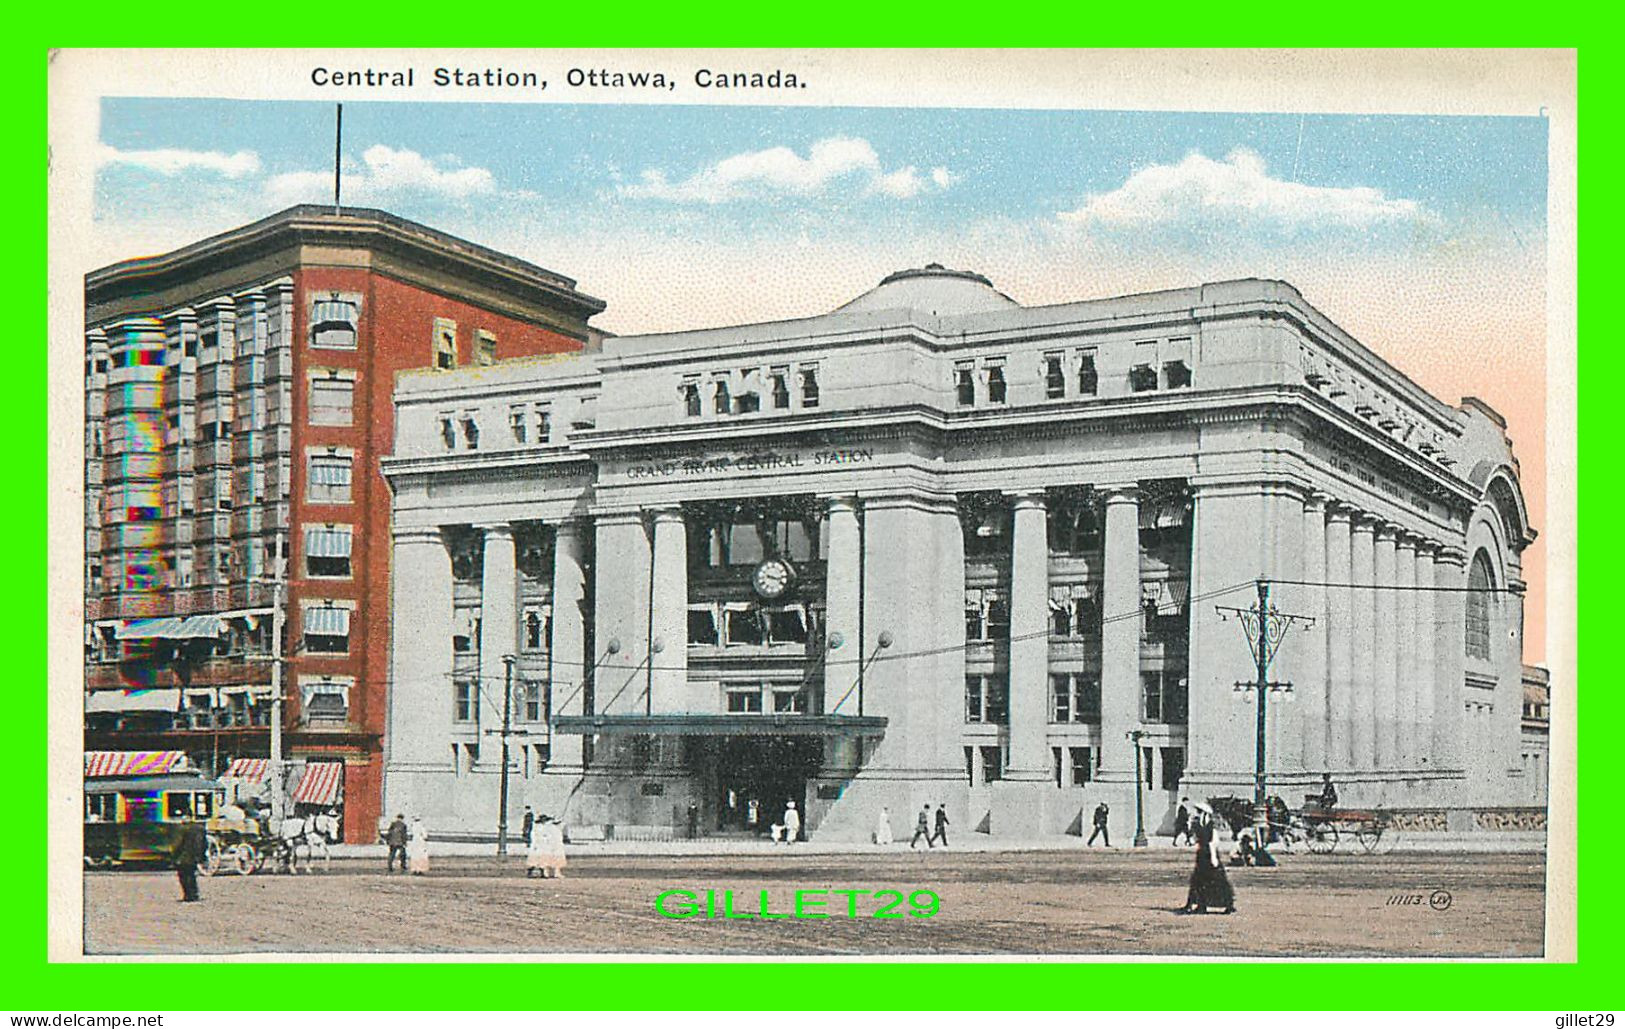 OTTAWA, ONTARIO - CENTRAL STATION - ANIMATED WITH PEOPLES - THE VALENTINE & SONS UNITED PUB CO - - Ottawa